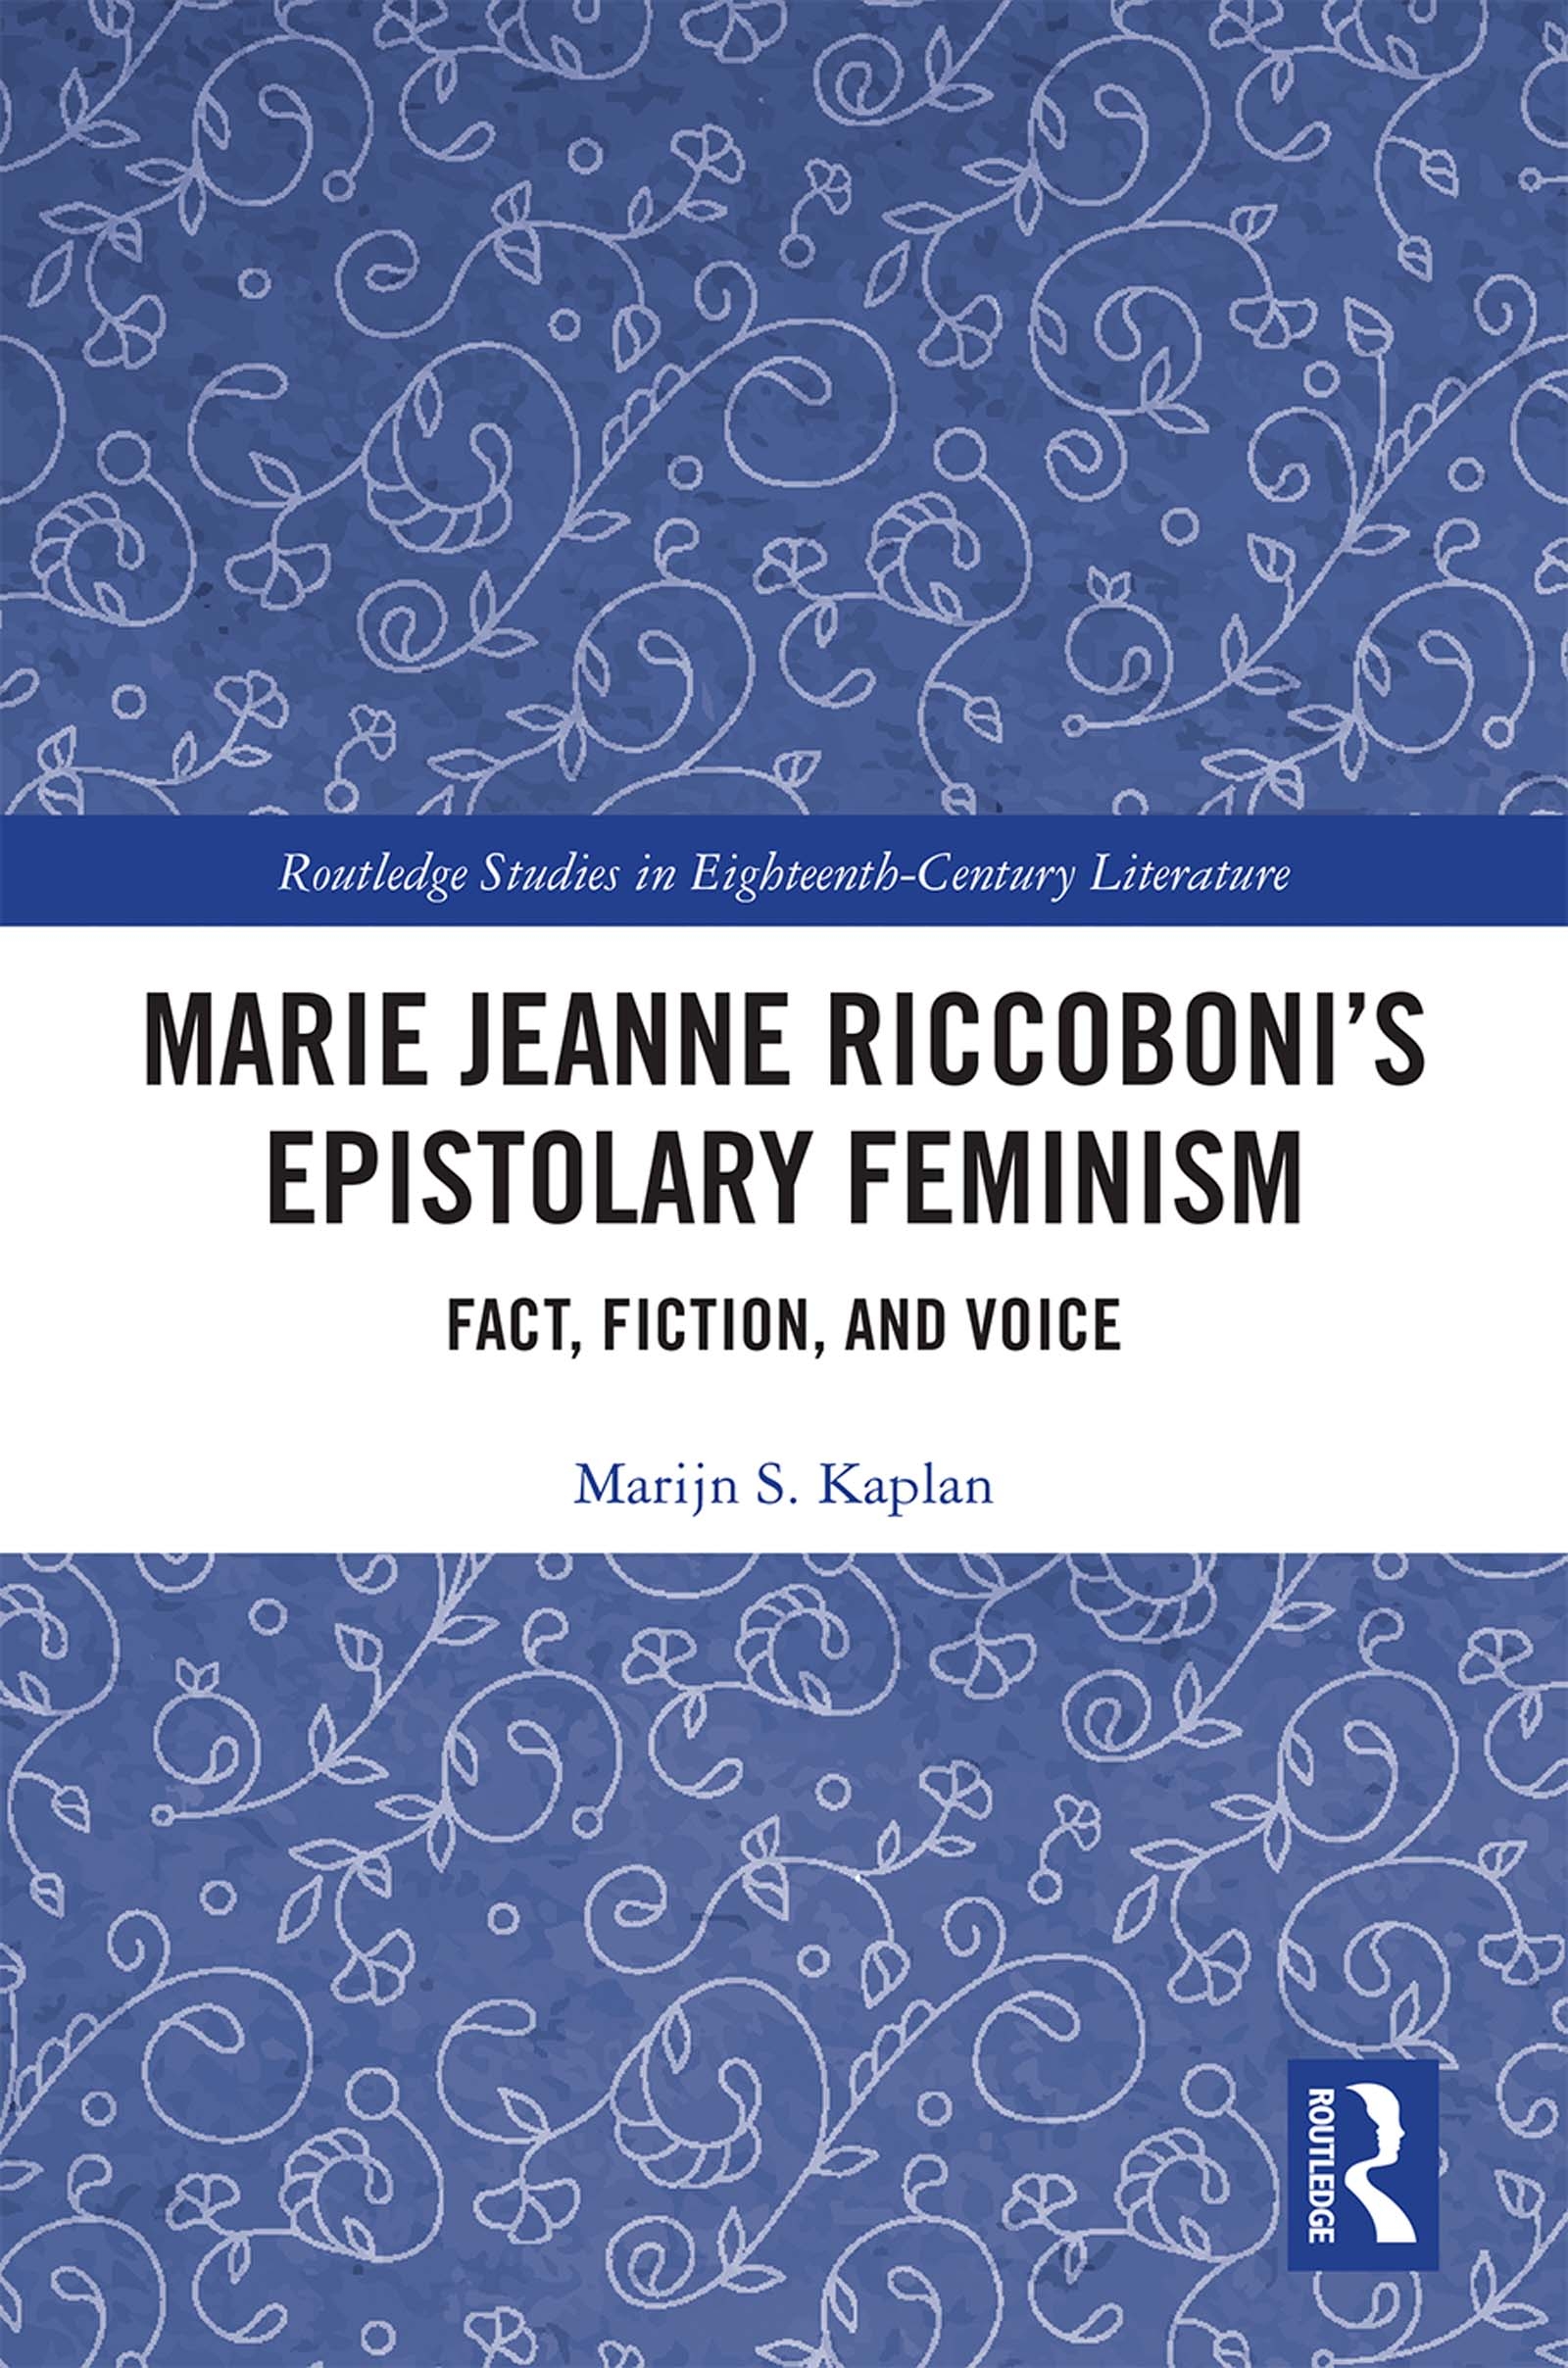 Marie Jeanne Riccoboni’s Epistolary Feminism: Fact, Fiction, and Voice